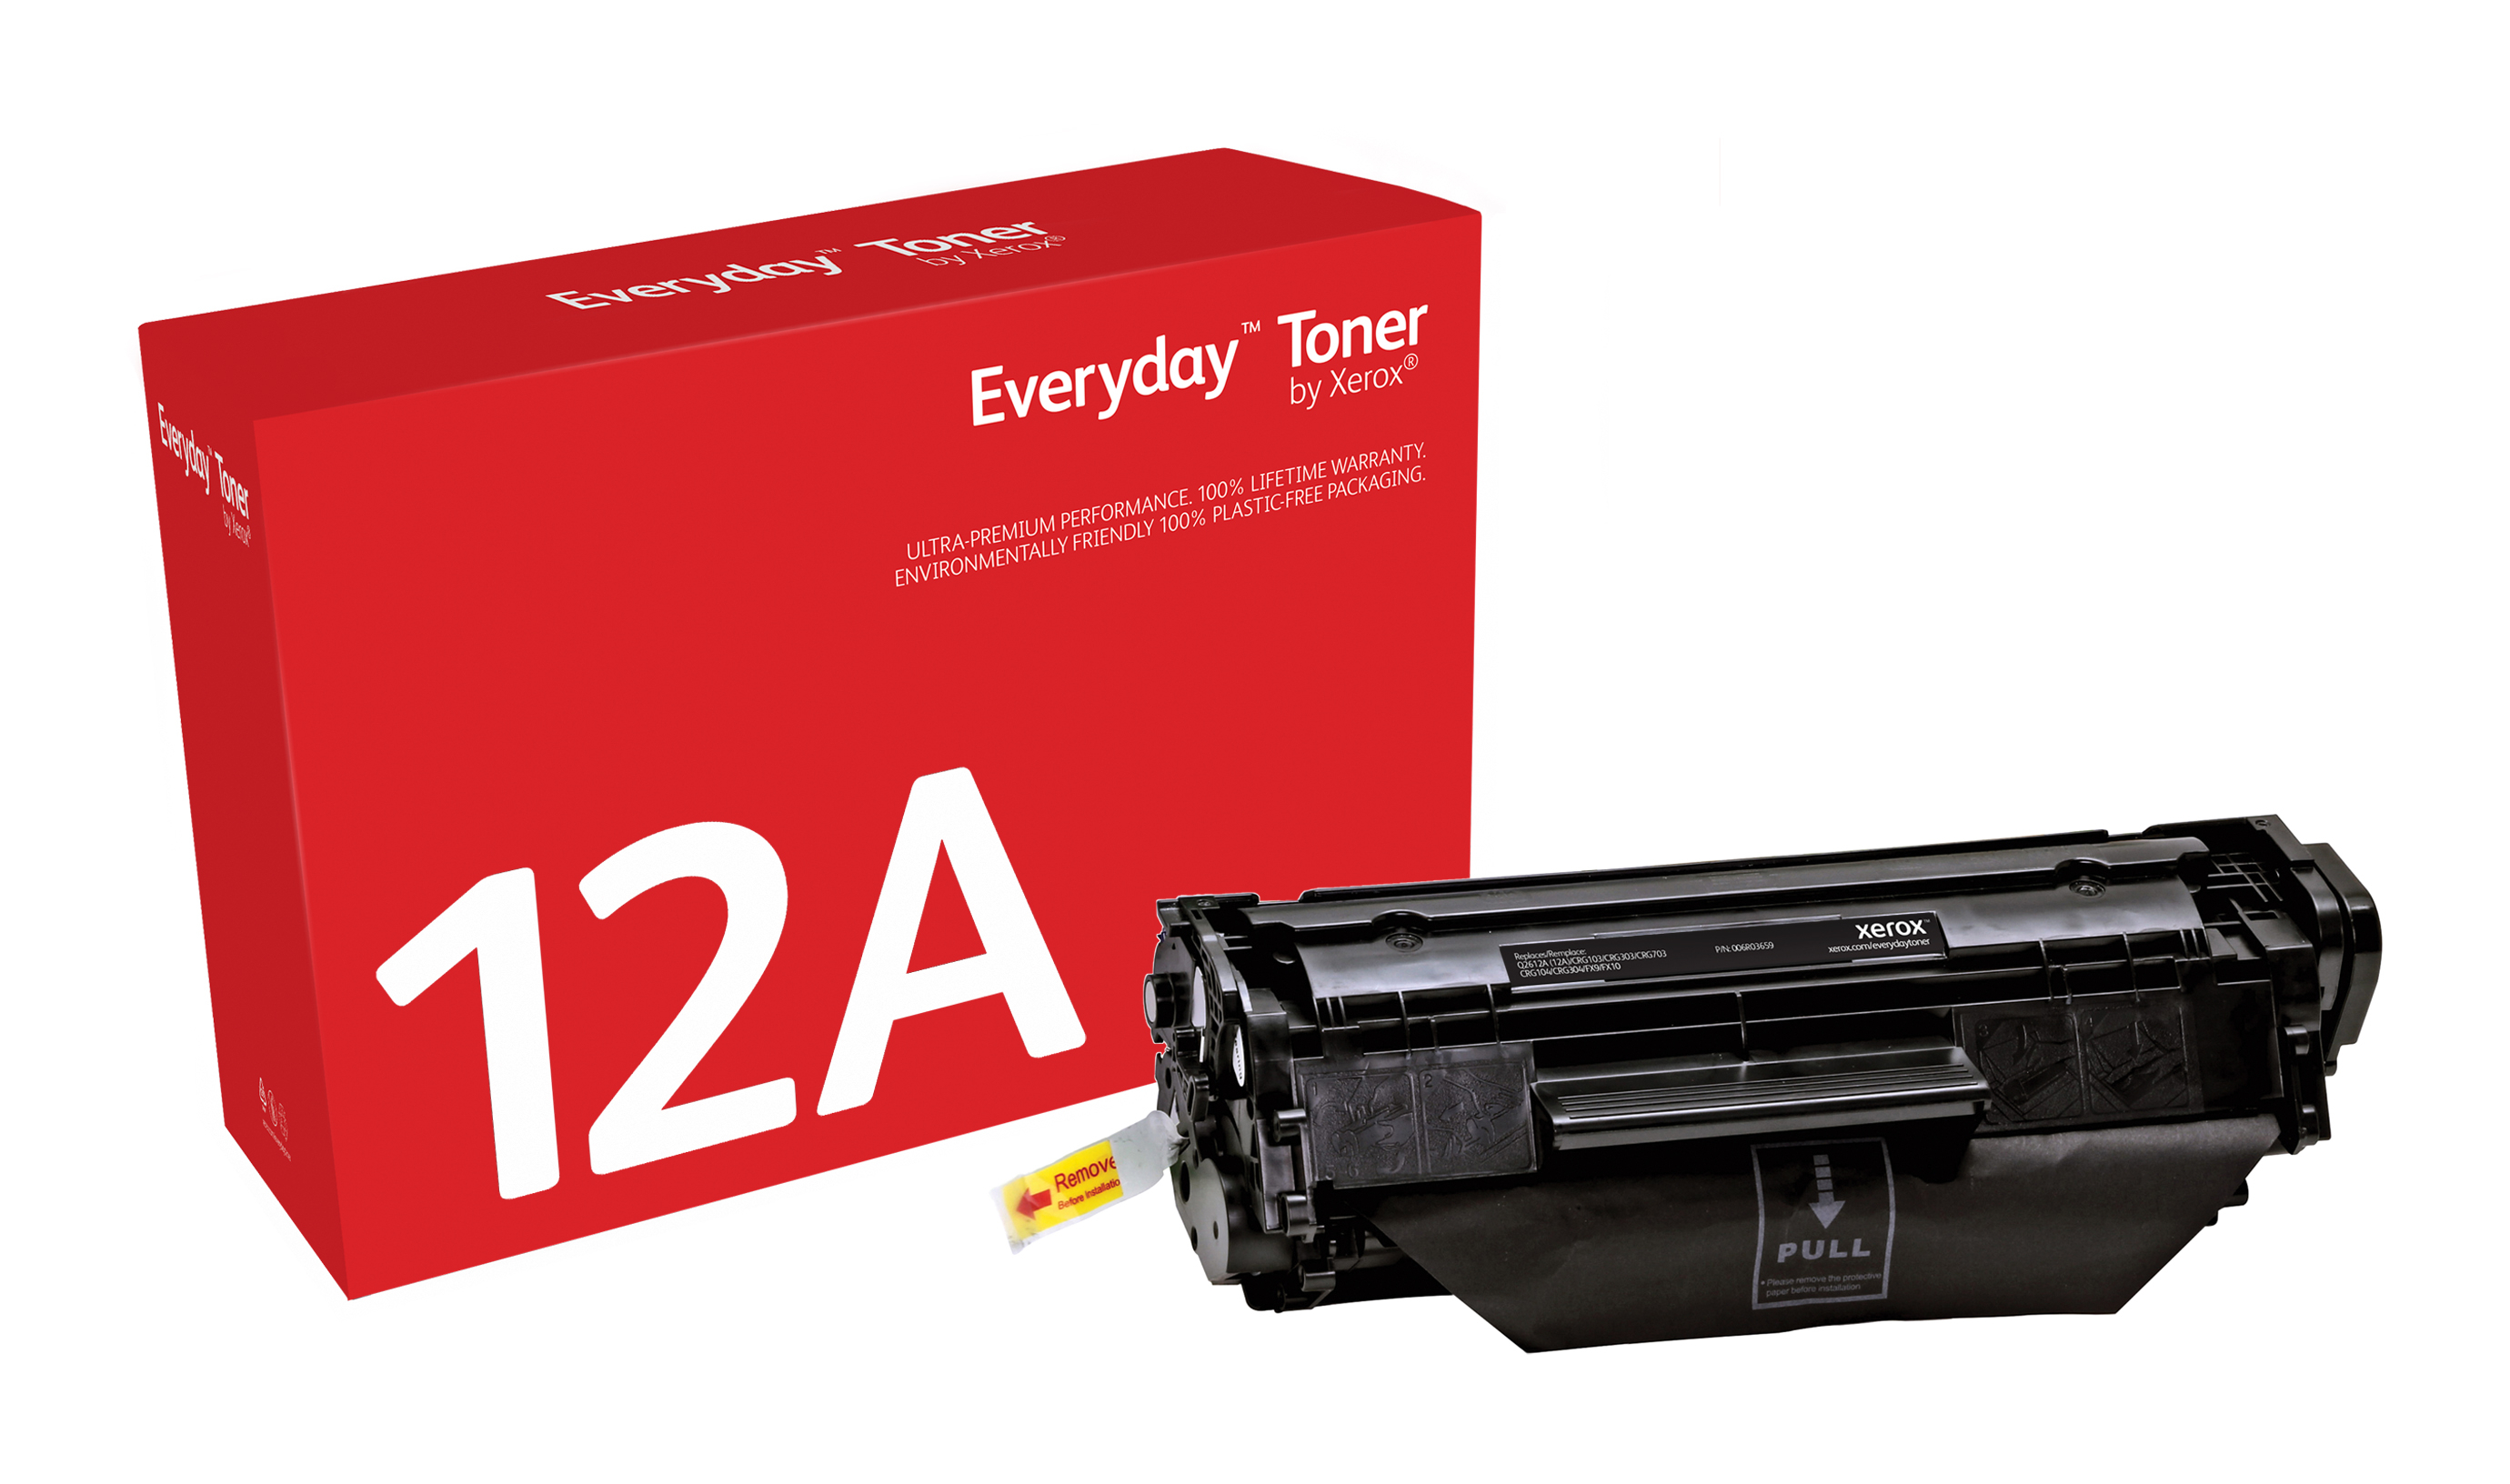 Everyday Black Toner compatible with HP 12A (Q2612A), Standard Yield  006R03659 by Xerox